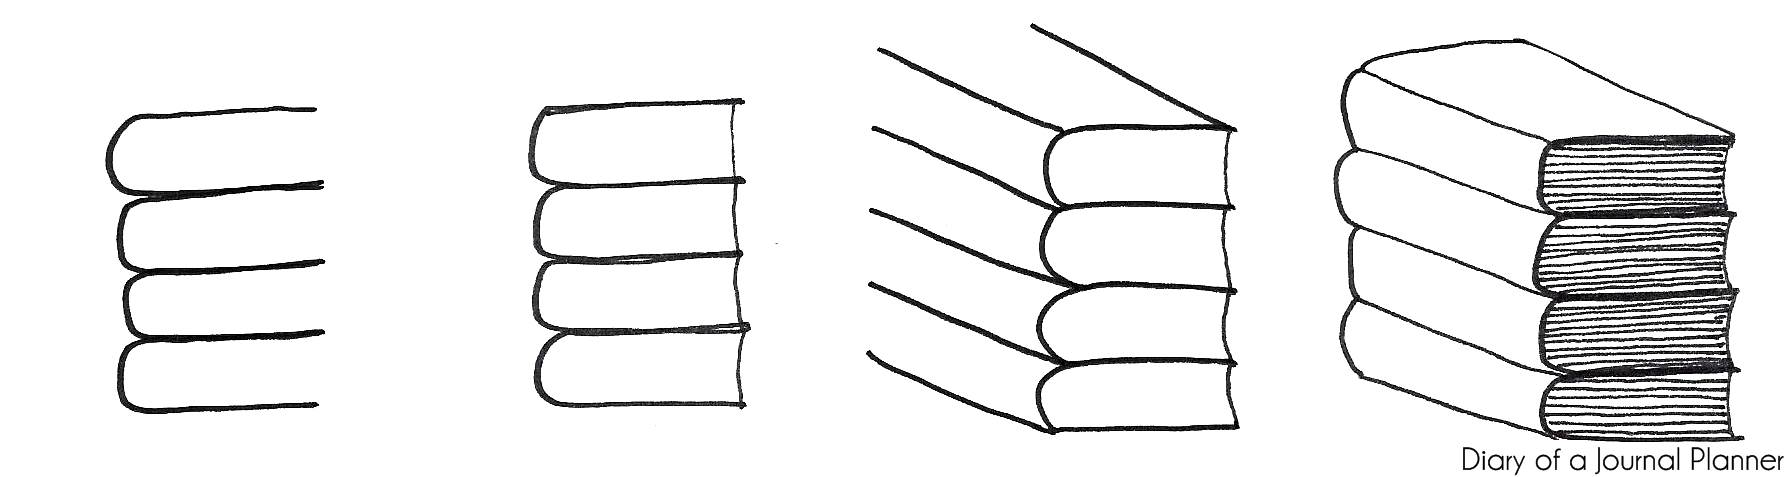 How to draw a stack of books